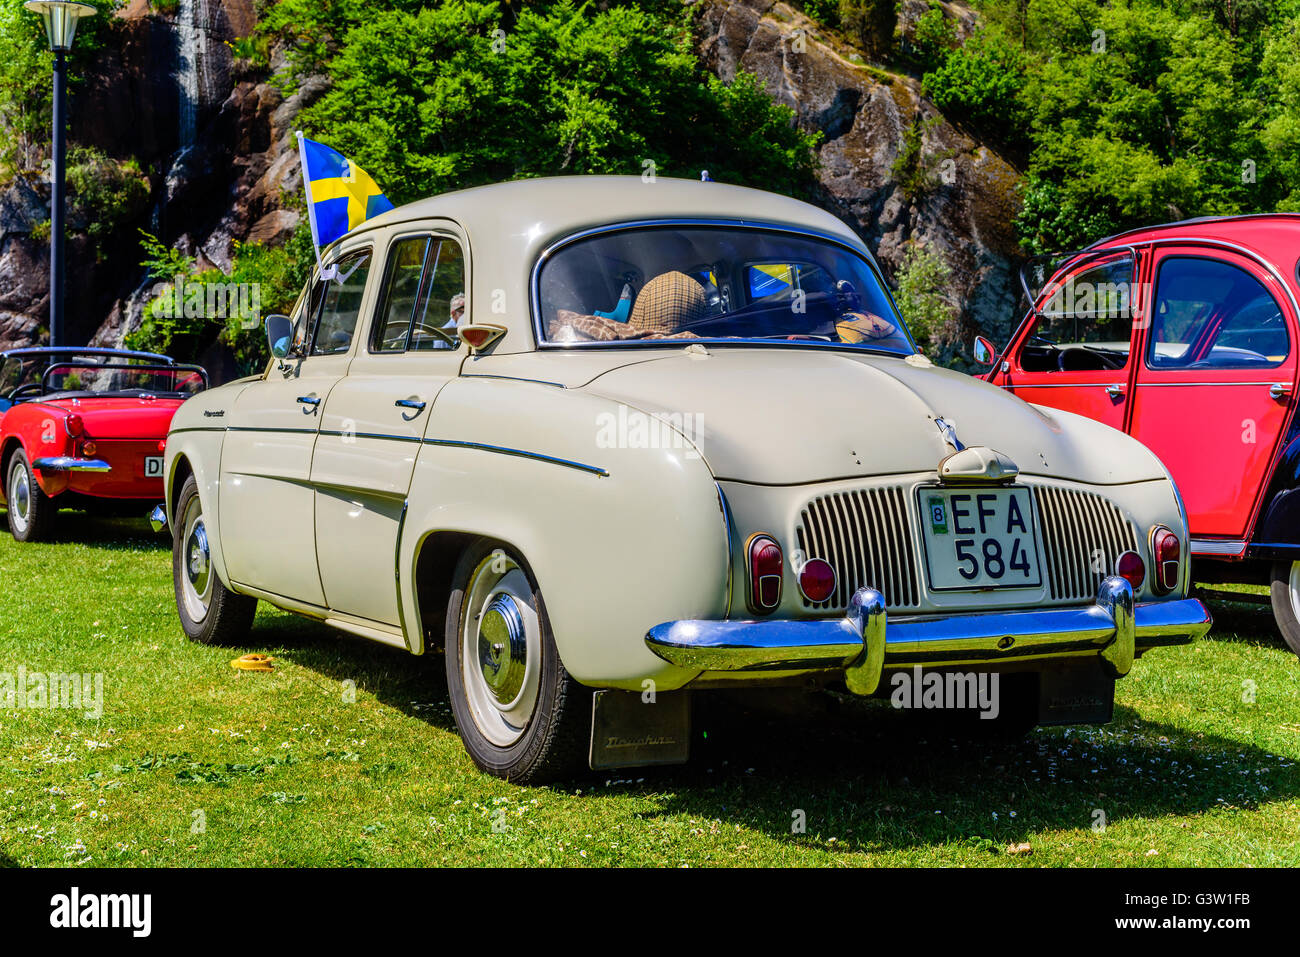 Ronneby, Sweden - June 6, 2016: The Swedish national day celebration in public park. Classic 1960 Renault Dauphine with Swedish Stock Photo